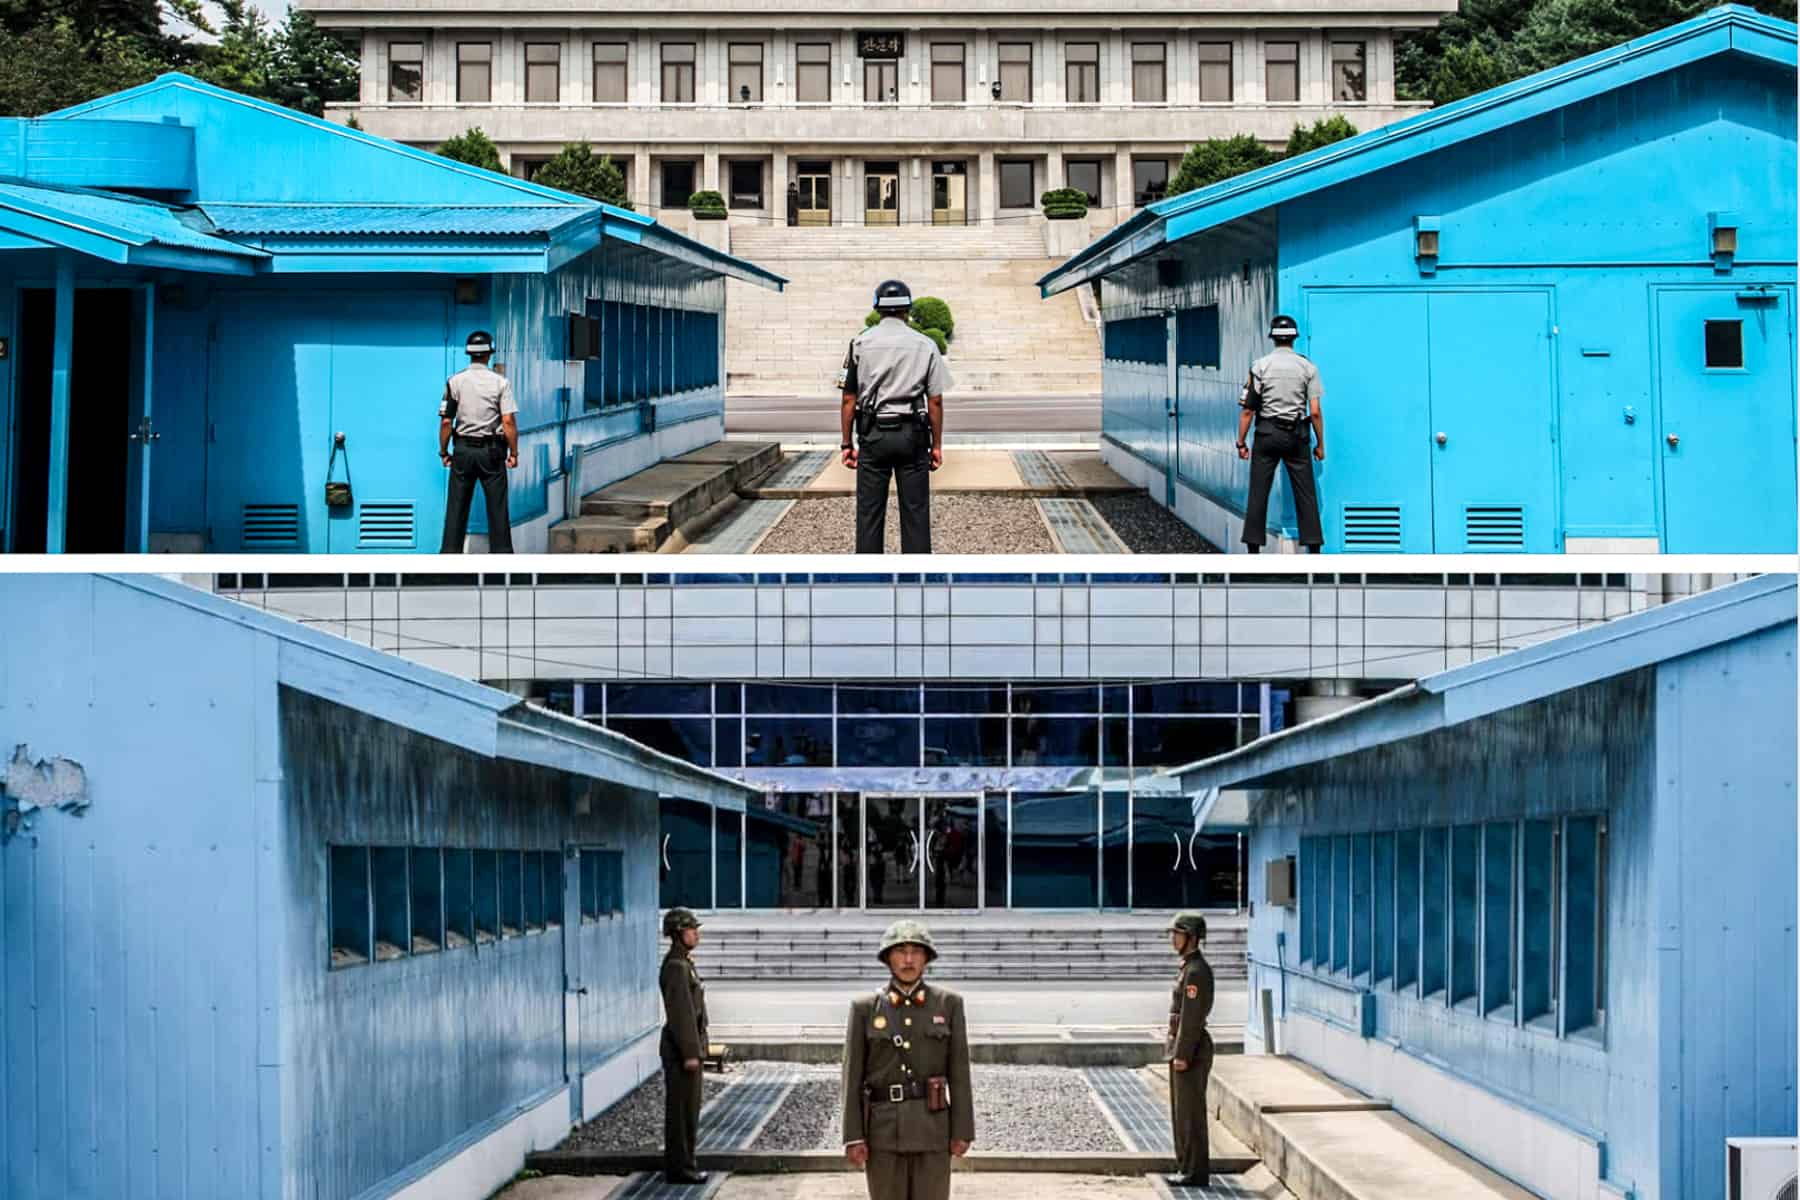 Two images from a DMZ tour showing Korean guards standing at the blue huts of the DMZ demilitarized zone. The top image is from South Korea facing North and the bottom is from North Korea looking towards the South. 